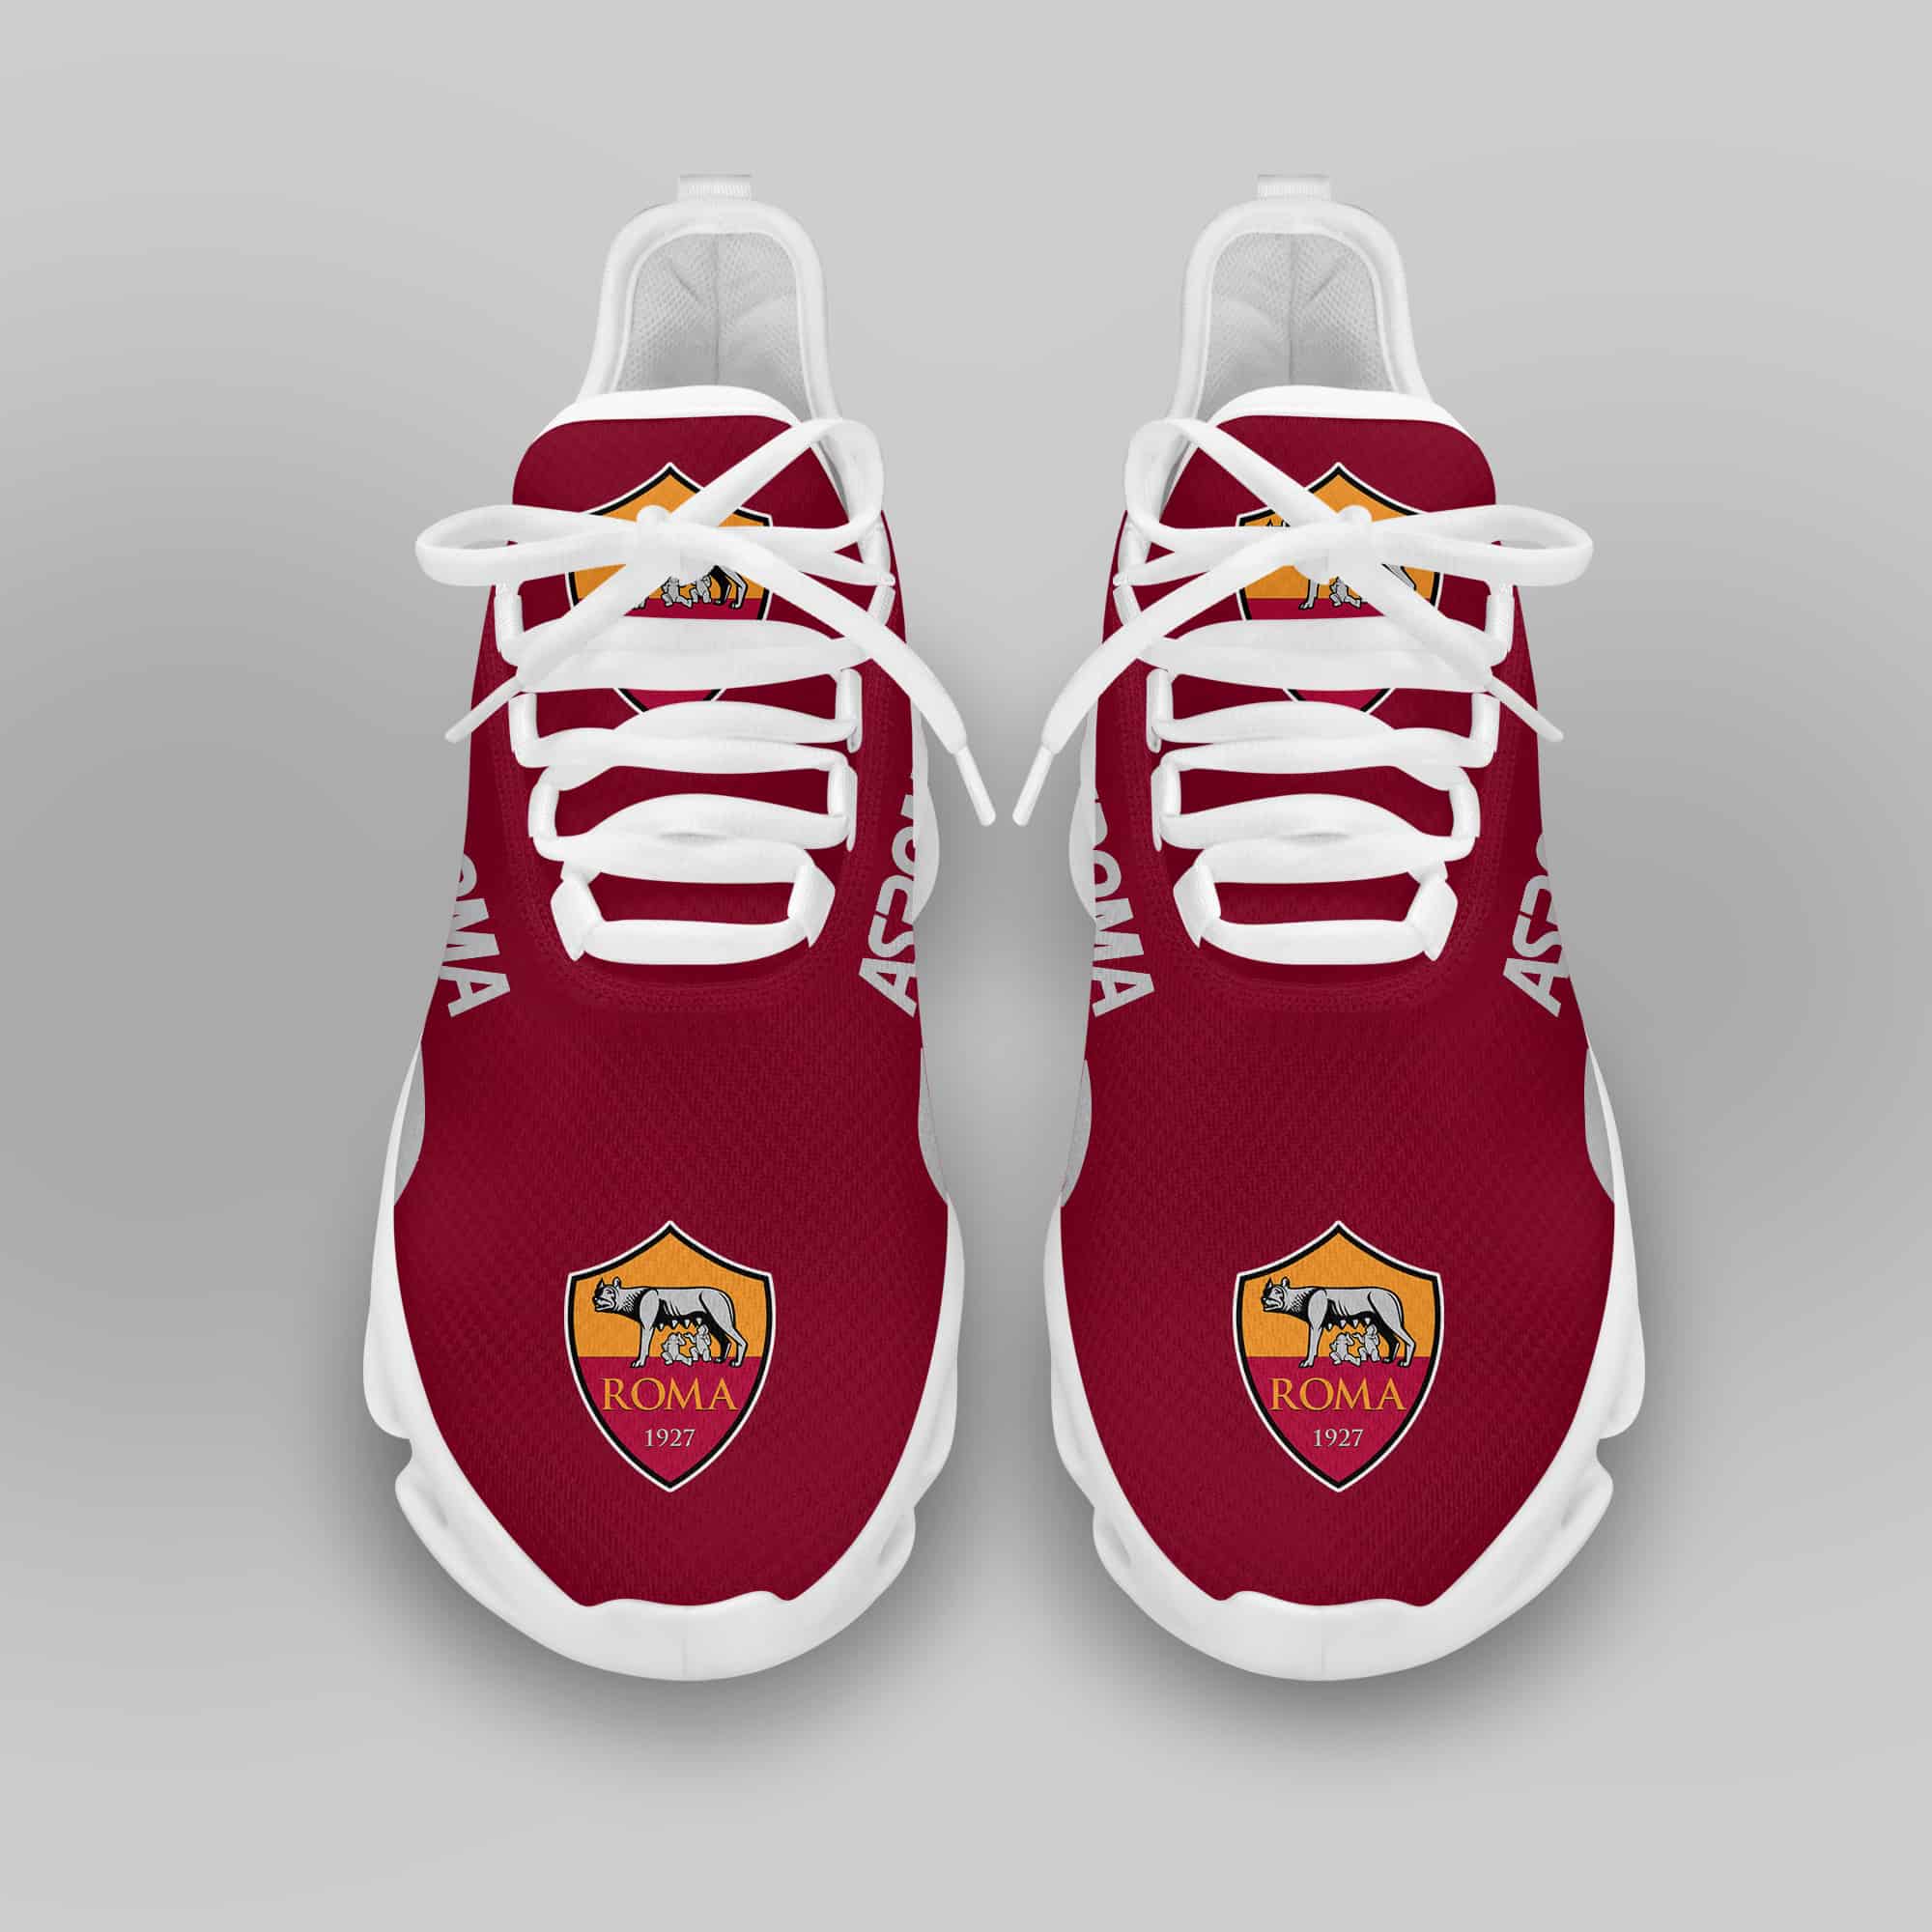 As Roma Running Shoes Max Soul Shoes Sneakers Ver 5 3